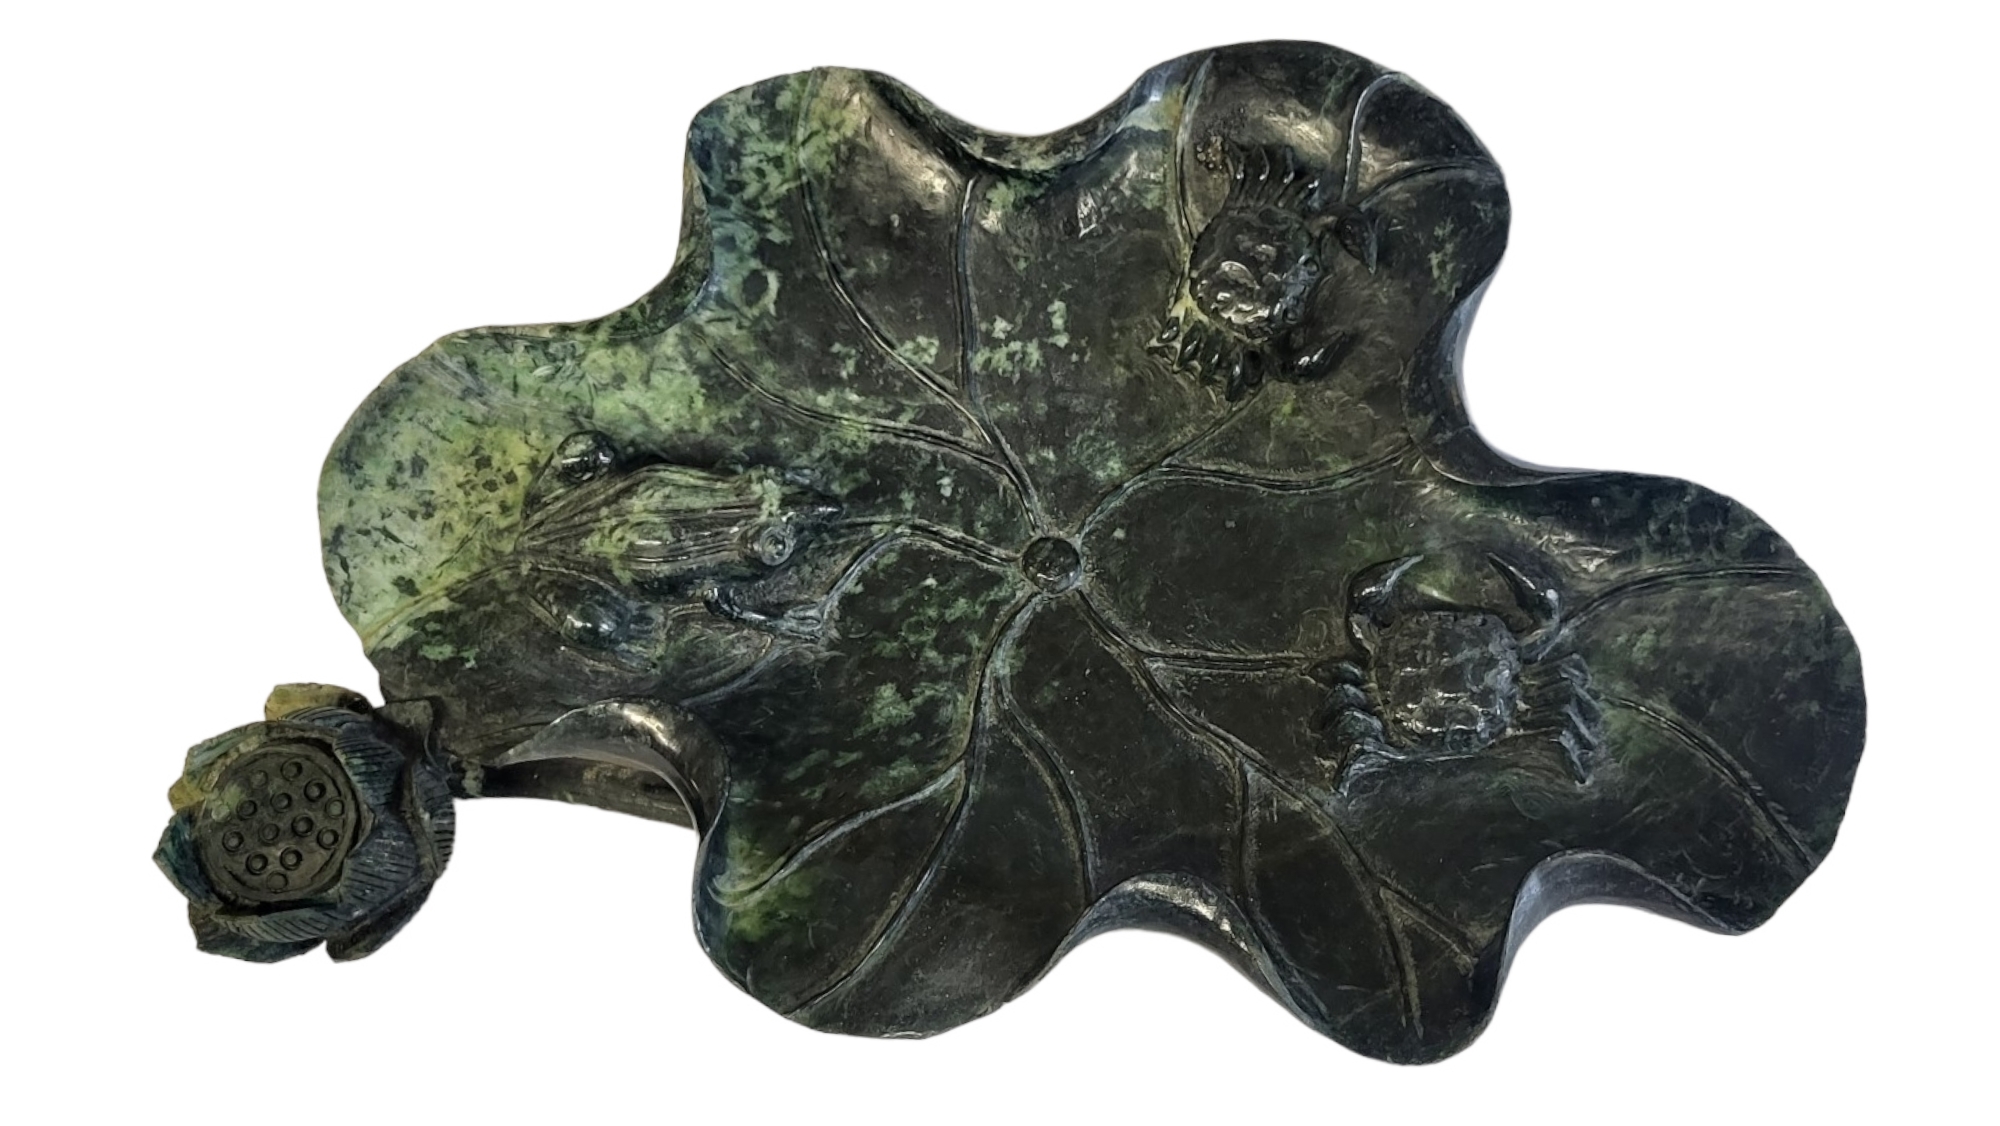 AN ORIENTAL JADEITE TYPE LEAF SHAPE TABLE 20TH CENTURY CENTREPIECE Top carved in relief with lotus